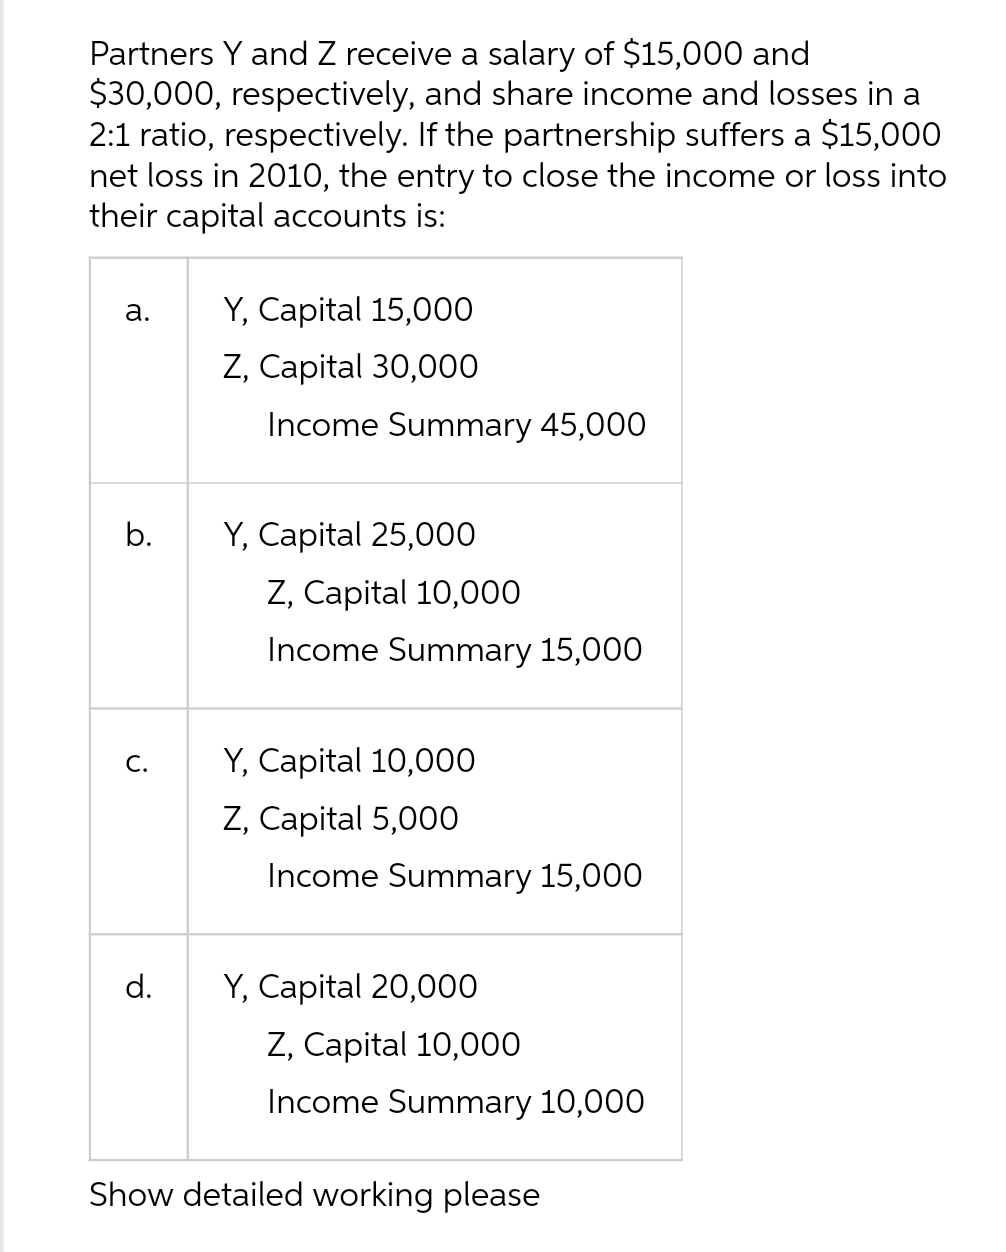 Partners Y and Z receive a salary of $15,000 and
$30,000, respectively, and share income and losses in a
2:1 ratio, respectively. If the partnership suffers a $15,000
net loss in 2010, the entry to close the income or loss into
their capital accounts is:
a.
b.
C.
d.
Y, Capital 15,000
Z, Capital 30,000
Income Summary 45,000
Y, Capital 25,000
Z, Capital 10,000
Income Summary 15,000
Y, Capital 10,000
Z, Capital 5,000
Income Summary 15,000
Y, Capital 20,000
Z, Capital 10,000
Income Summary 10,000
Show detailed working please